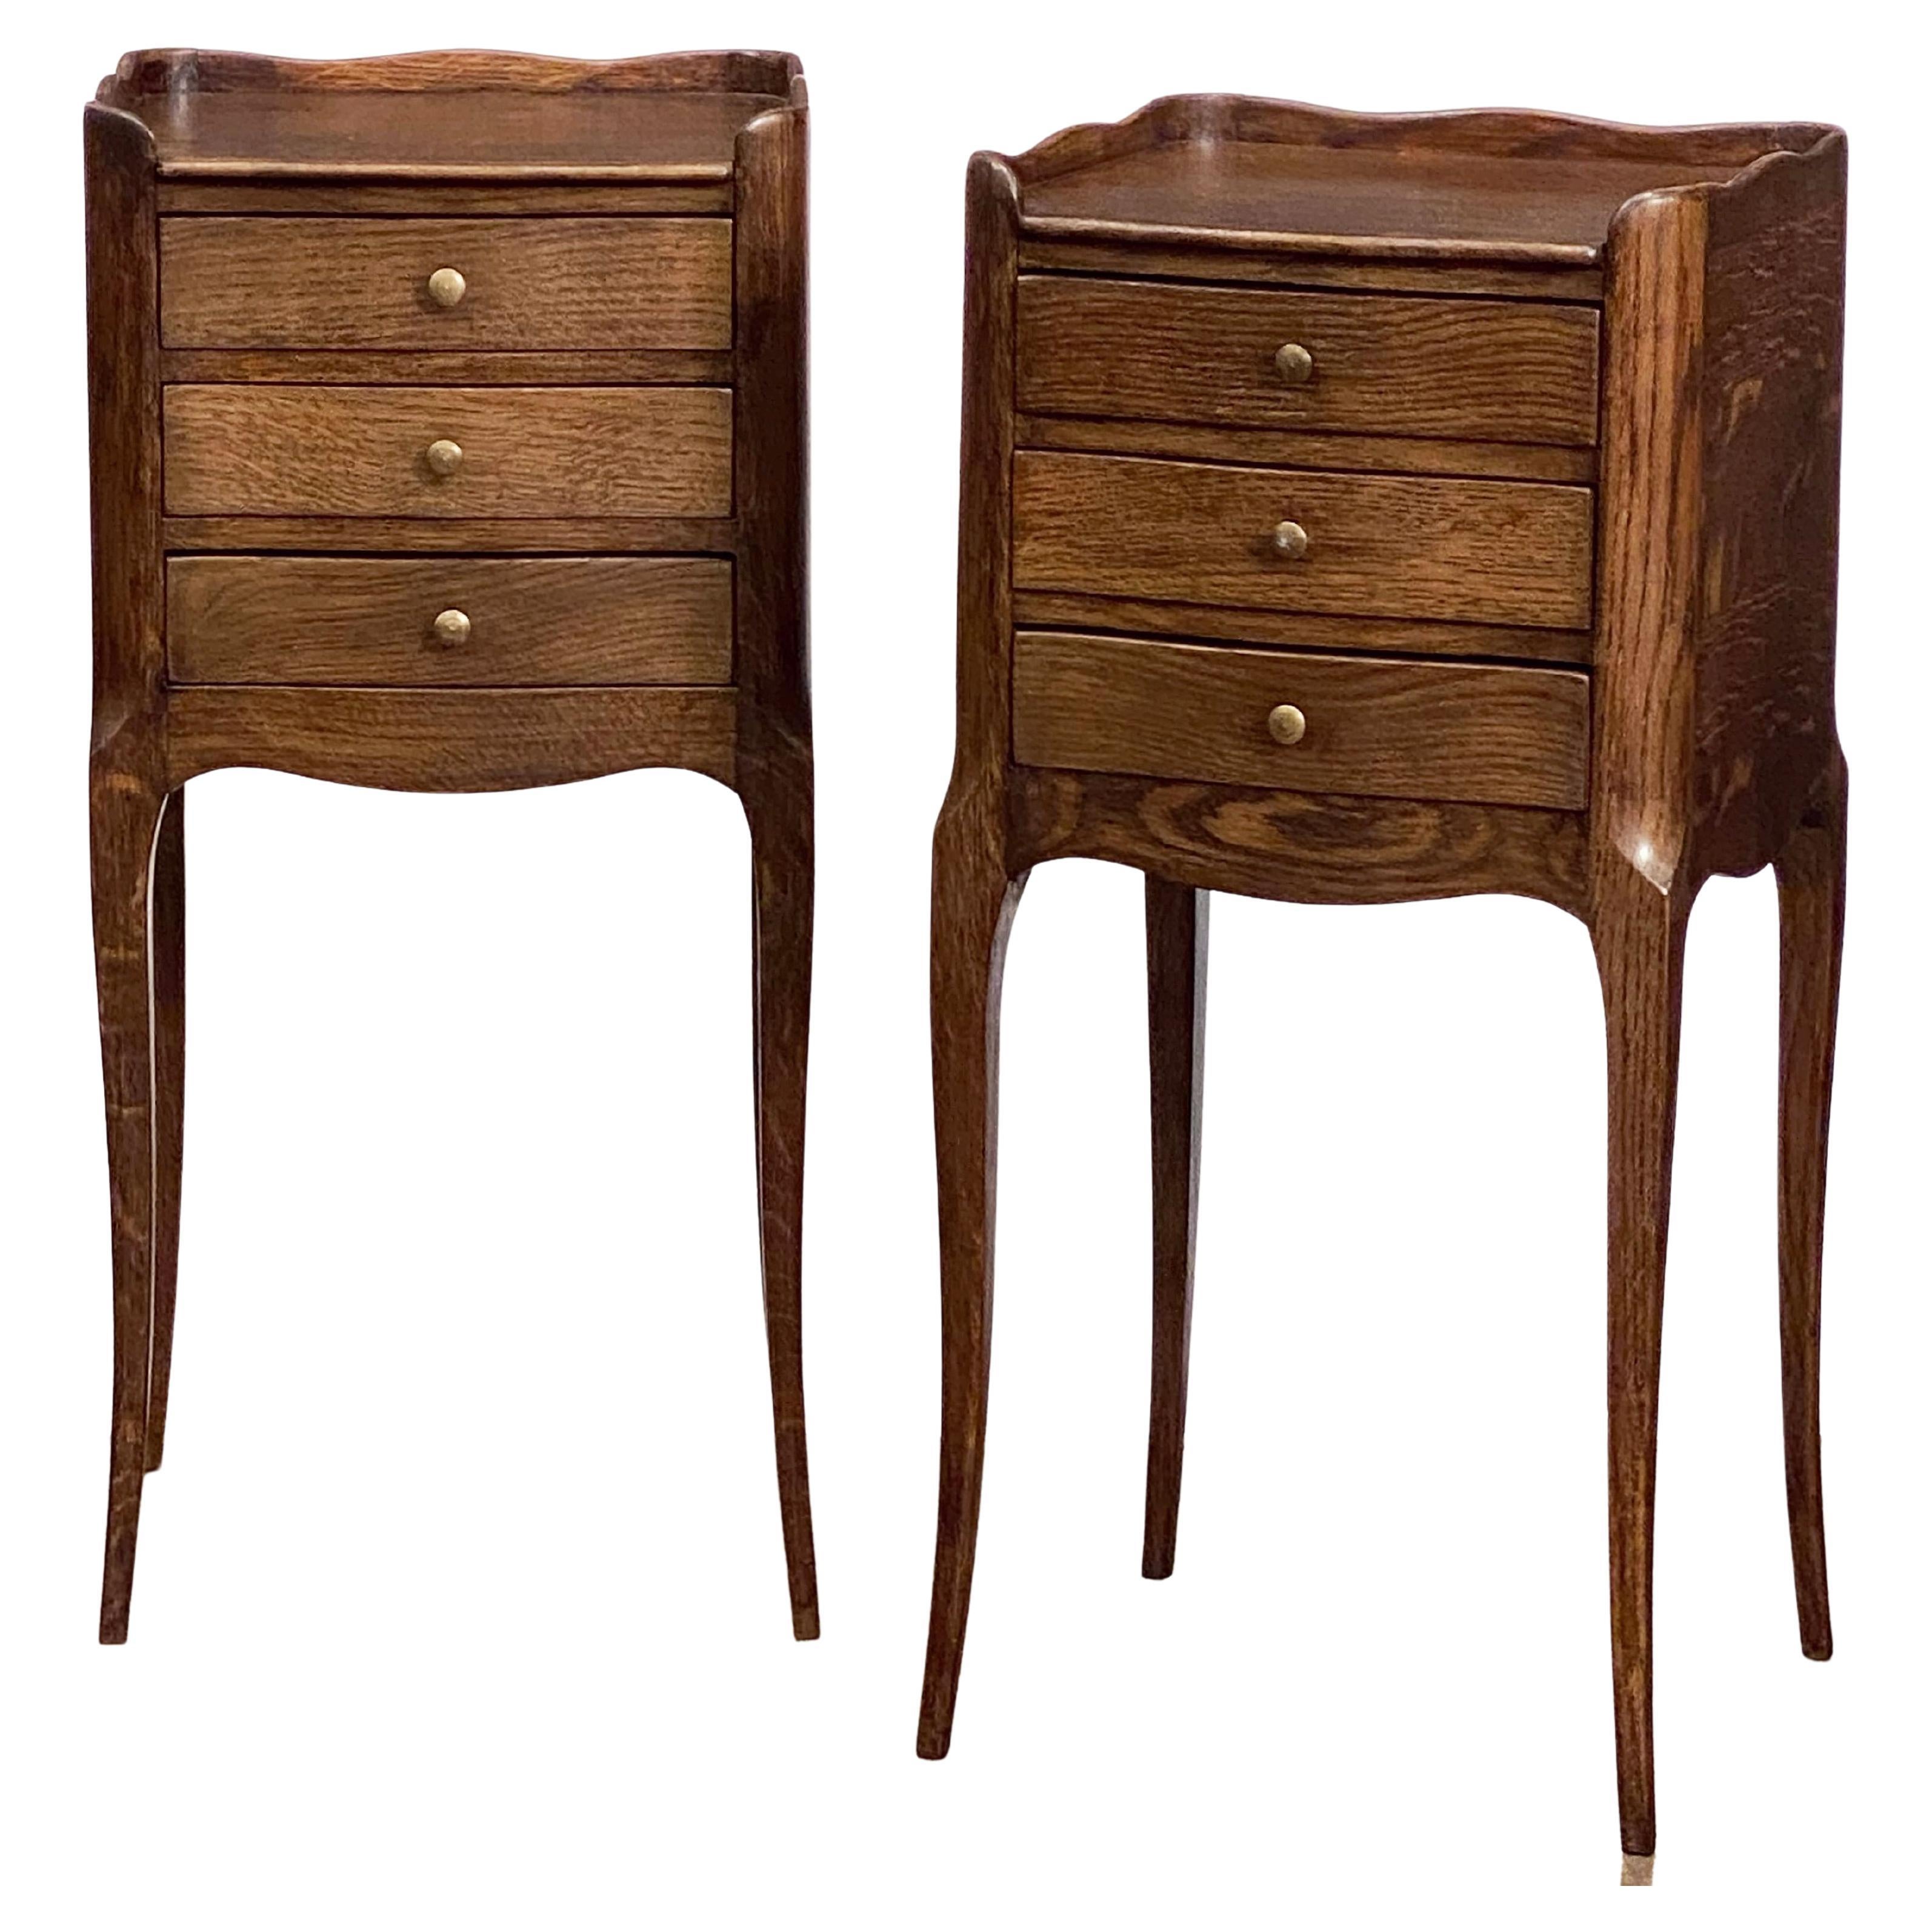 Pair of French Three-Drawer Bedside End Tables or Nightstands of Oak